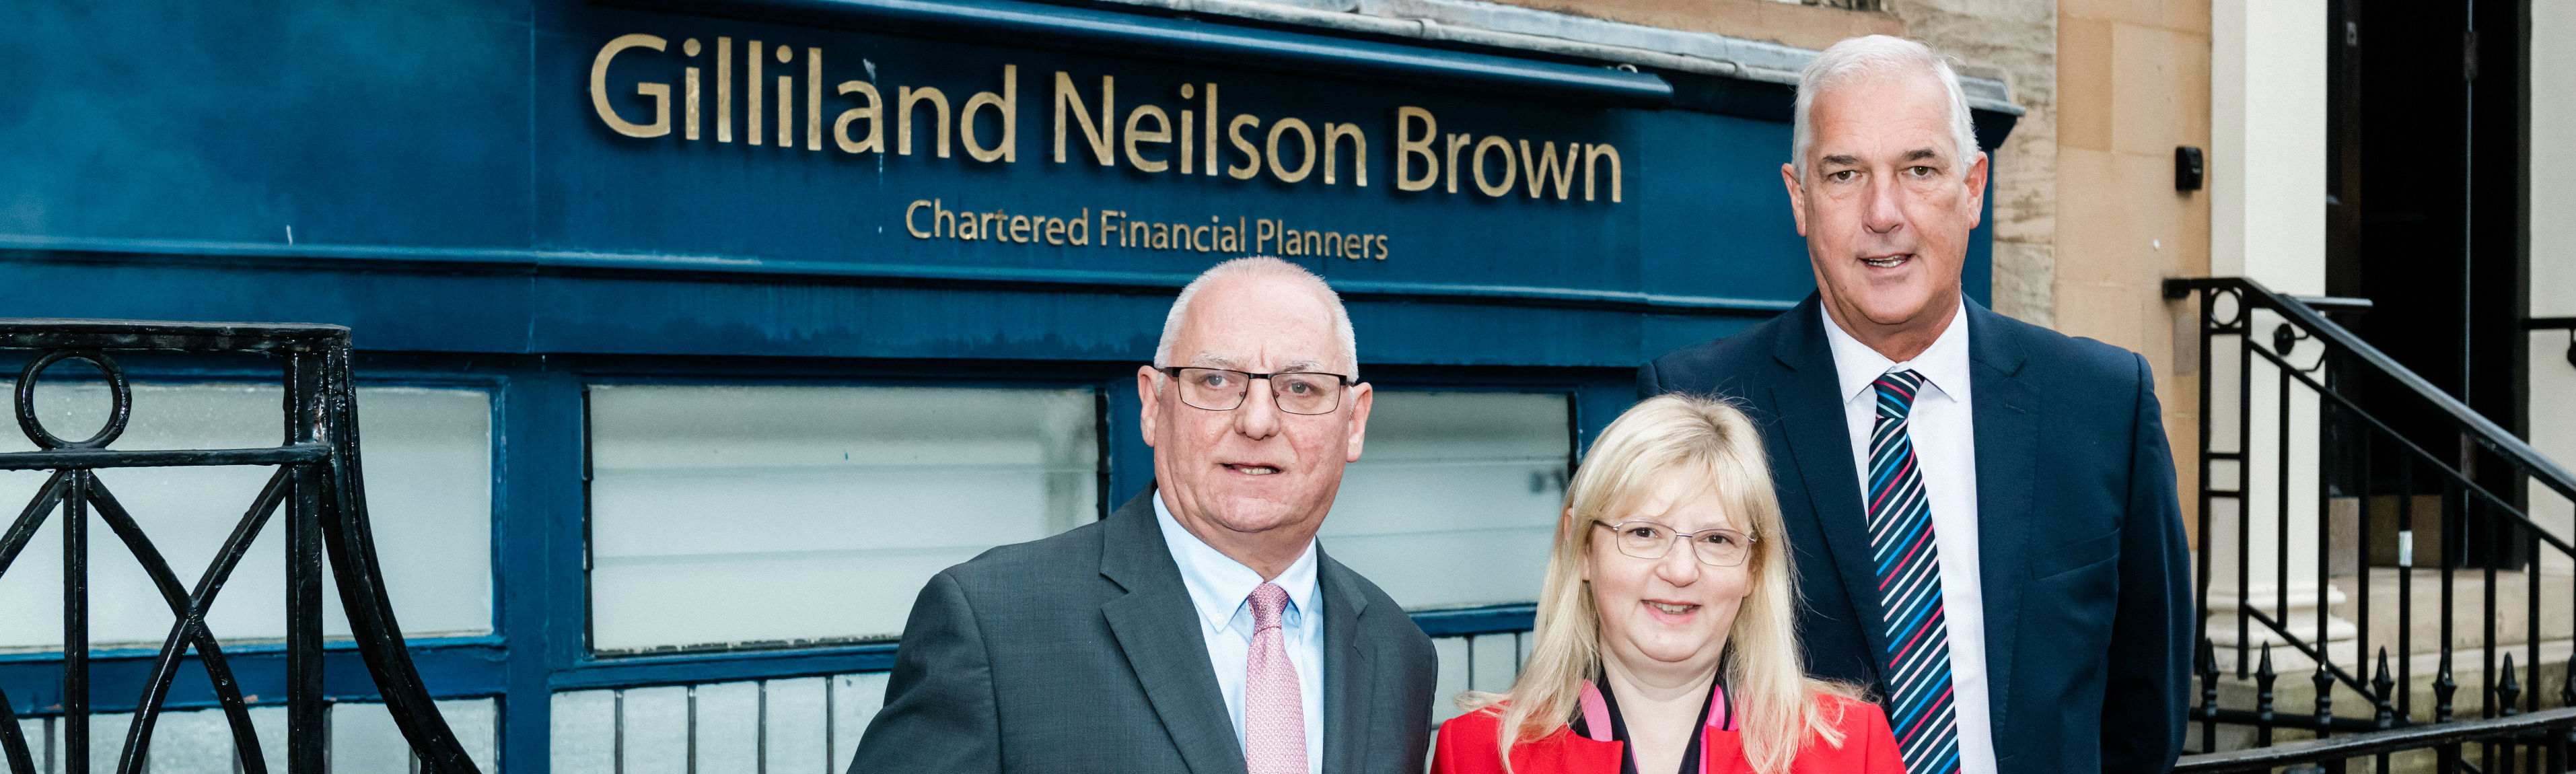 Acquisition by Glasgow wealth manager 